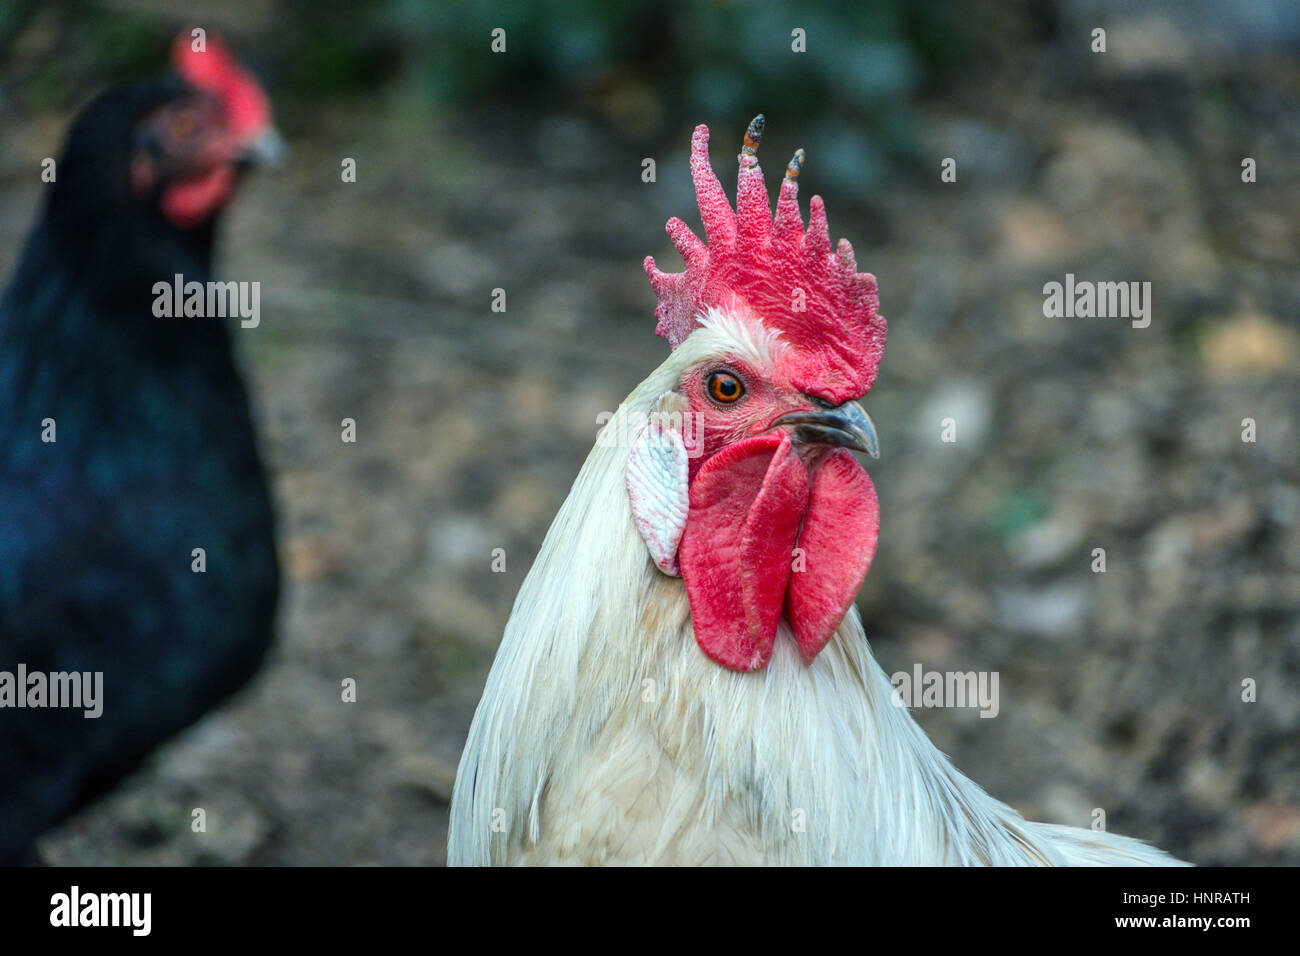 A very large Brahma chicken with an arco red comb on its head and black and  white color grazing on the background of a juicy green grass Stock Photo -  Alamy